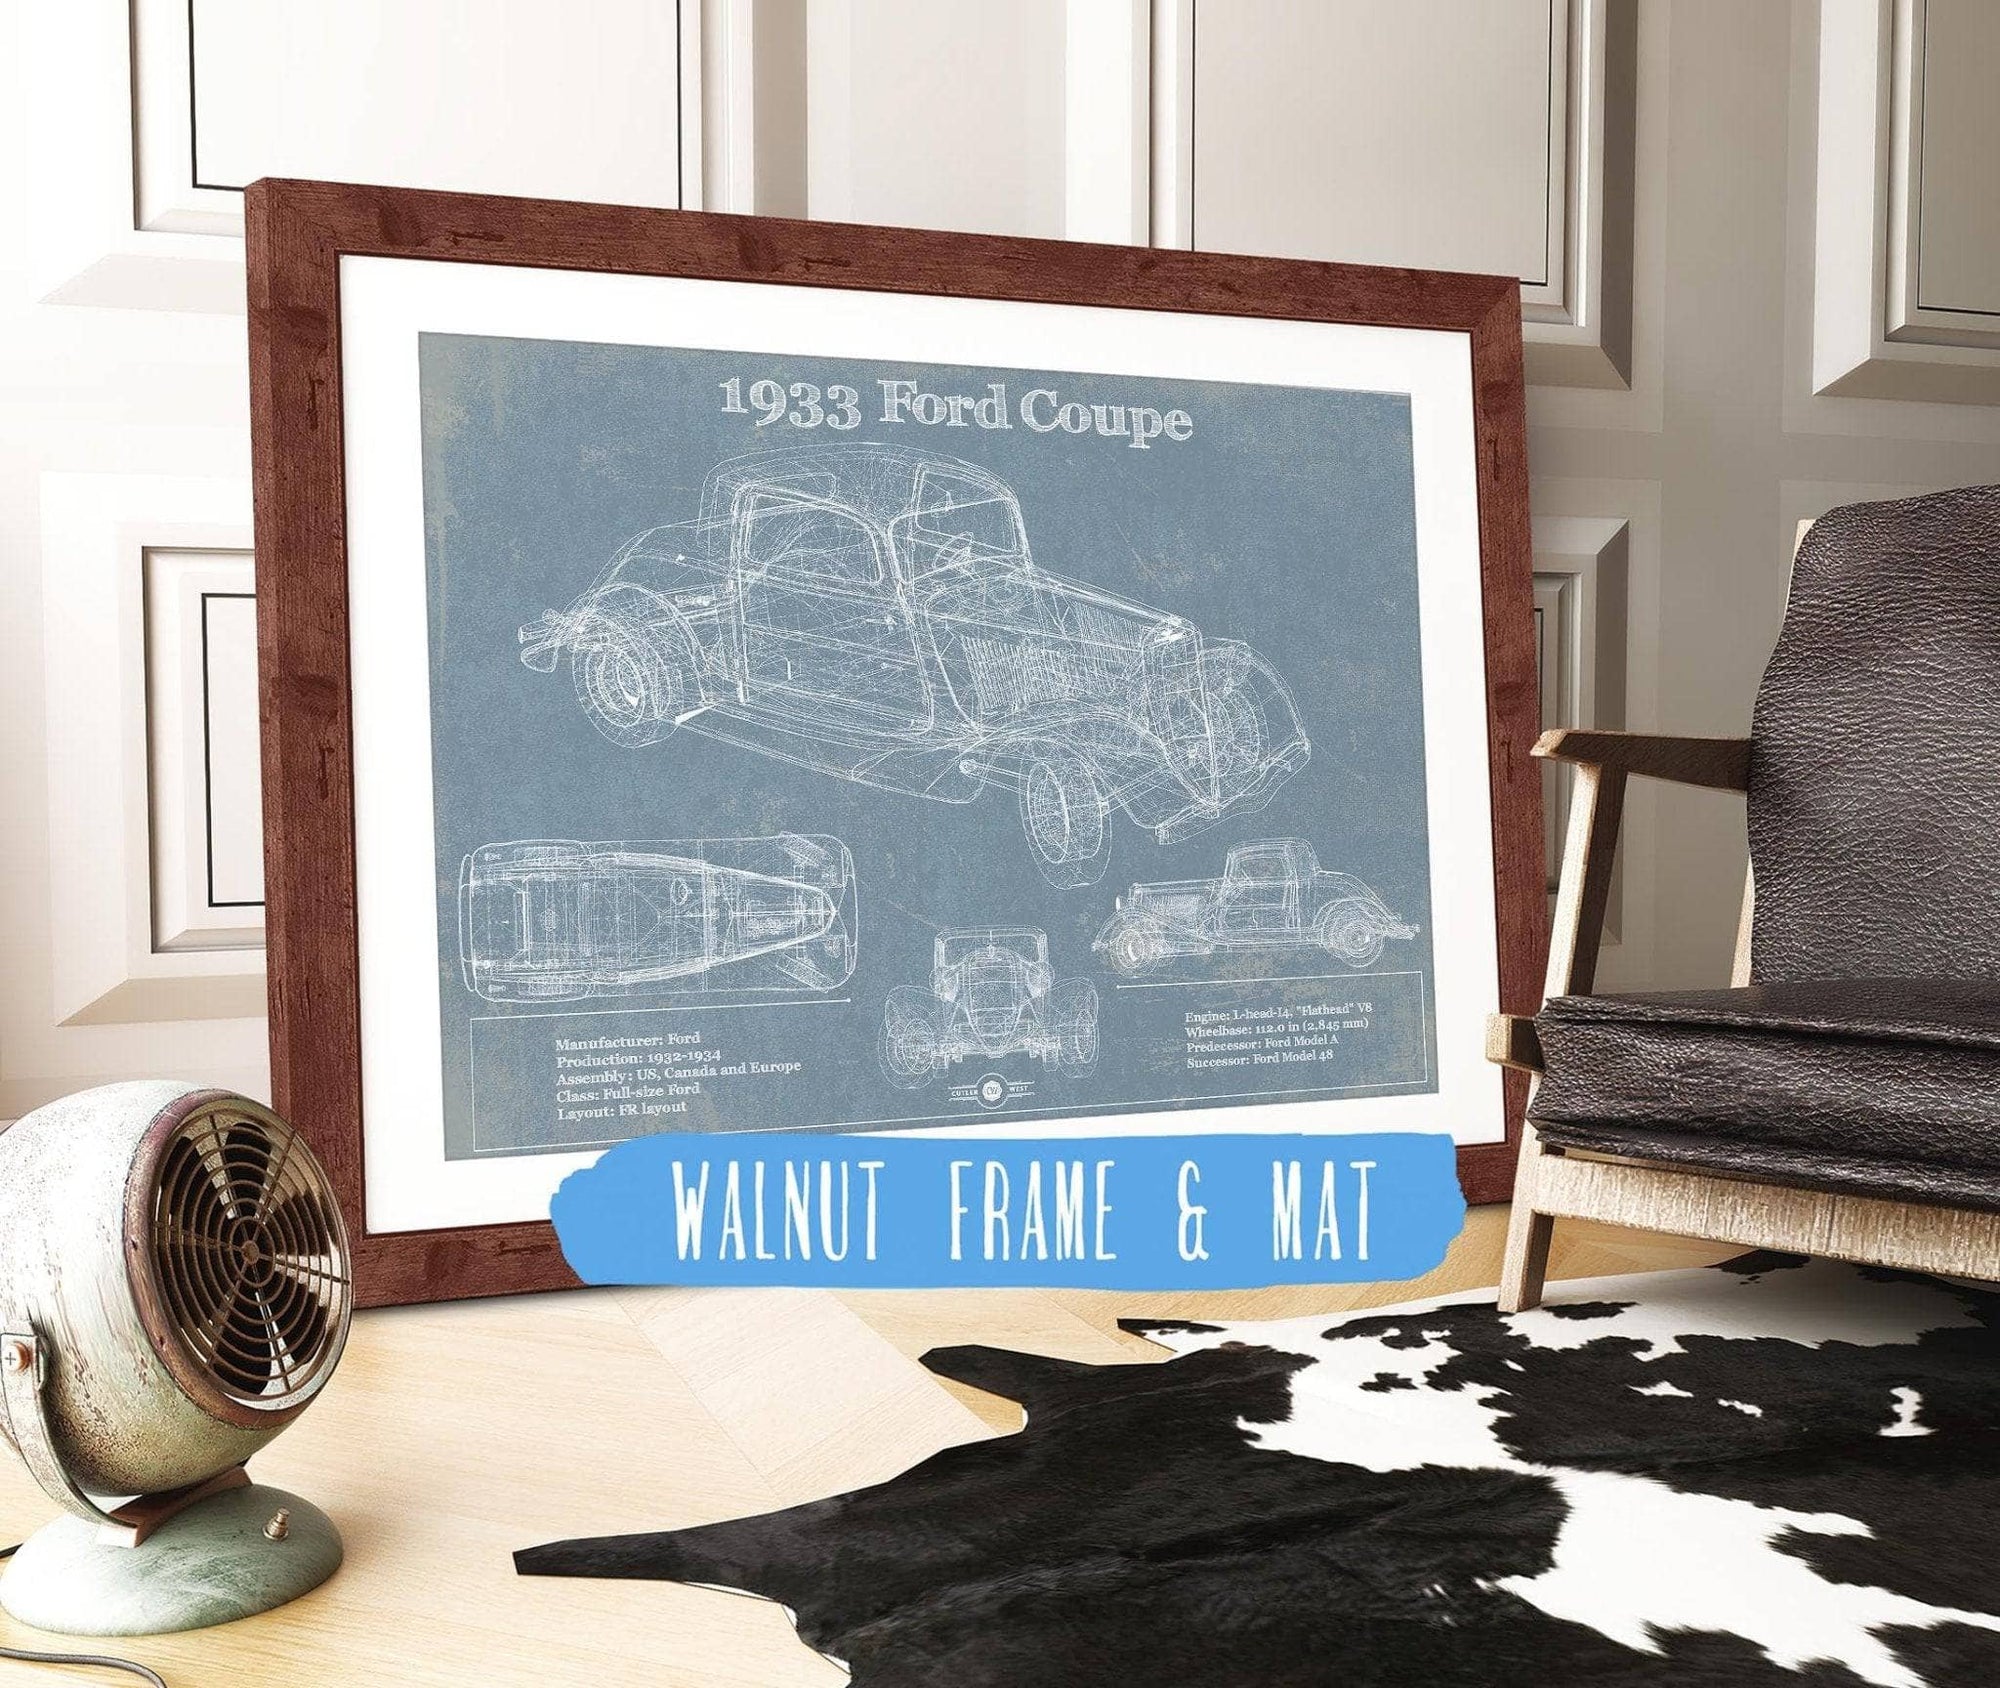 Cutler West Ford Collection 14" x 11" / Walnut Frame & Mat 1933 Ford Coupe Vintage Blueprint Auto Print 933311095_34881